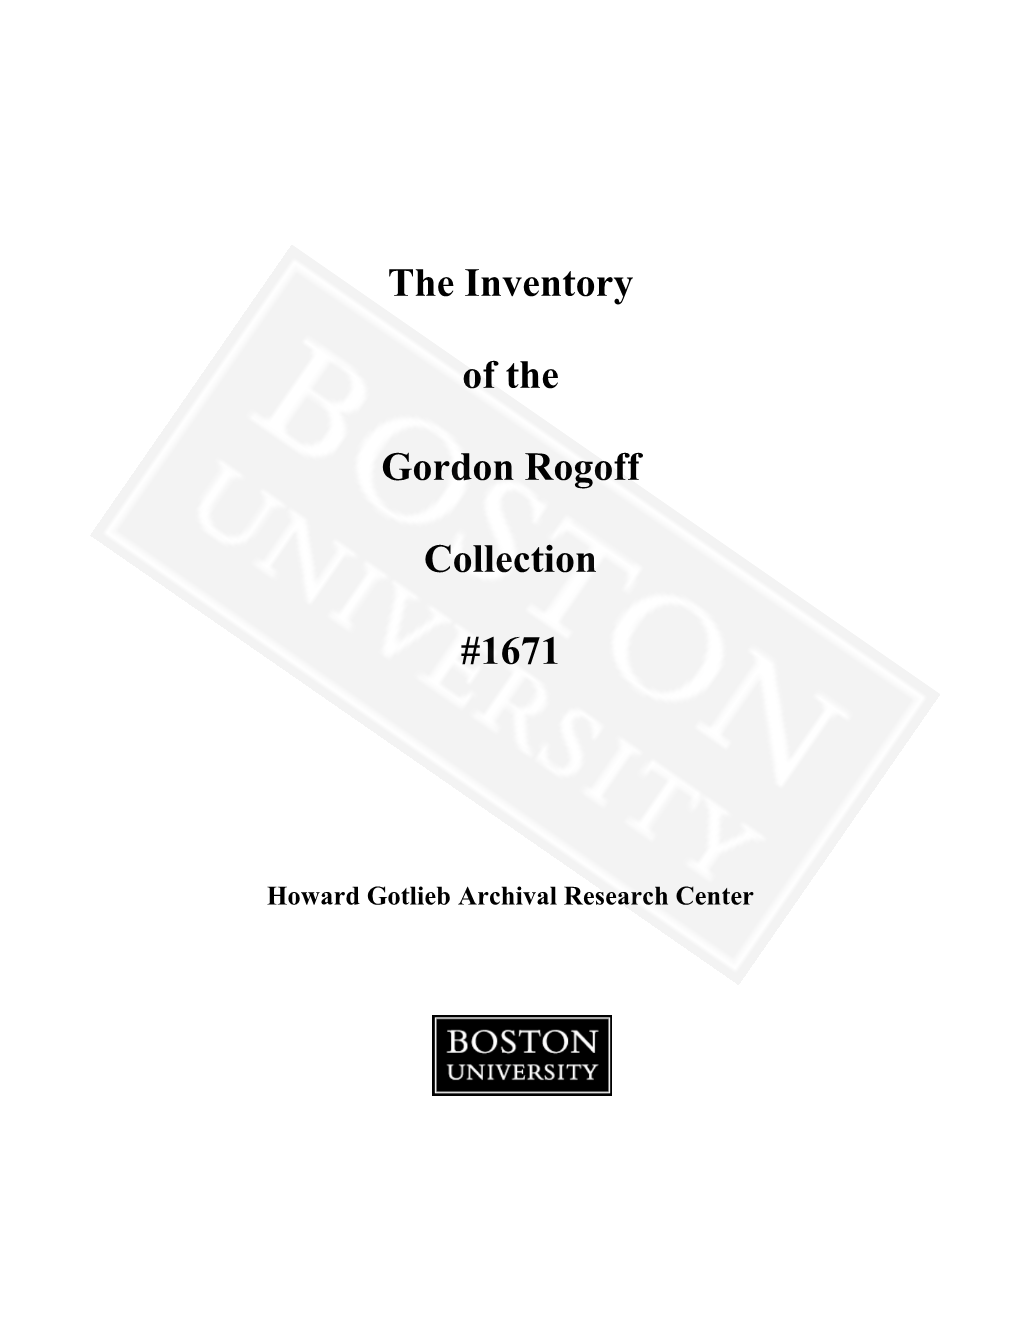 The Inventory of the Gordon Rogoff Collection #1671